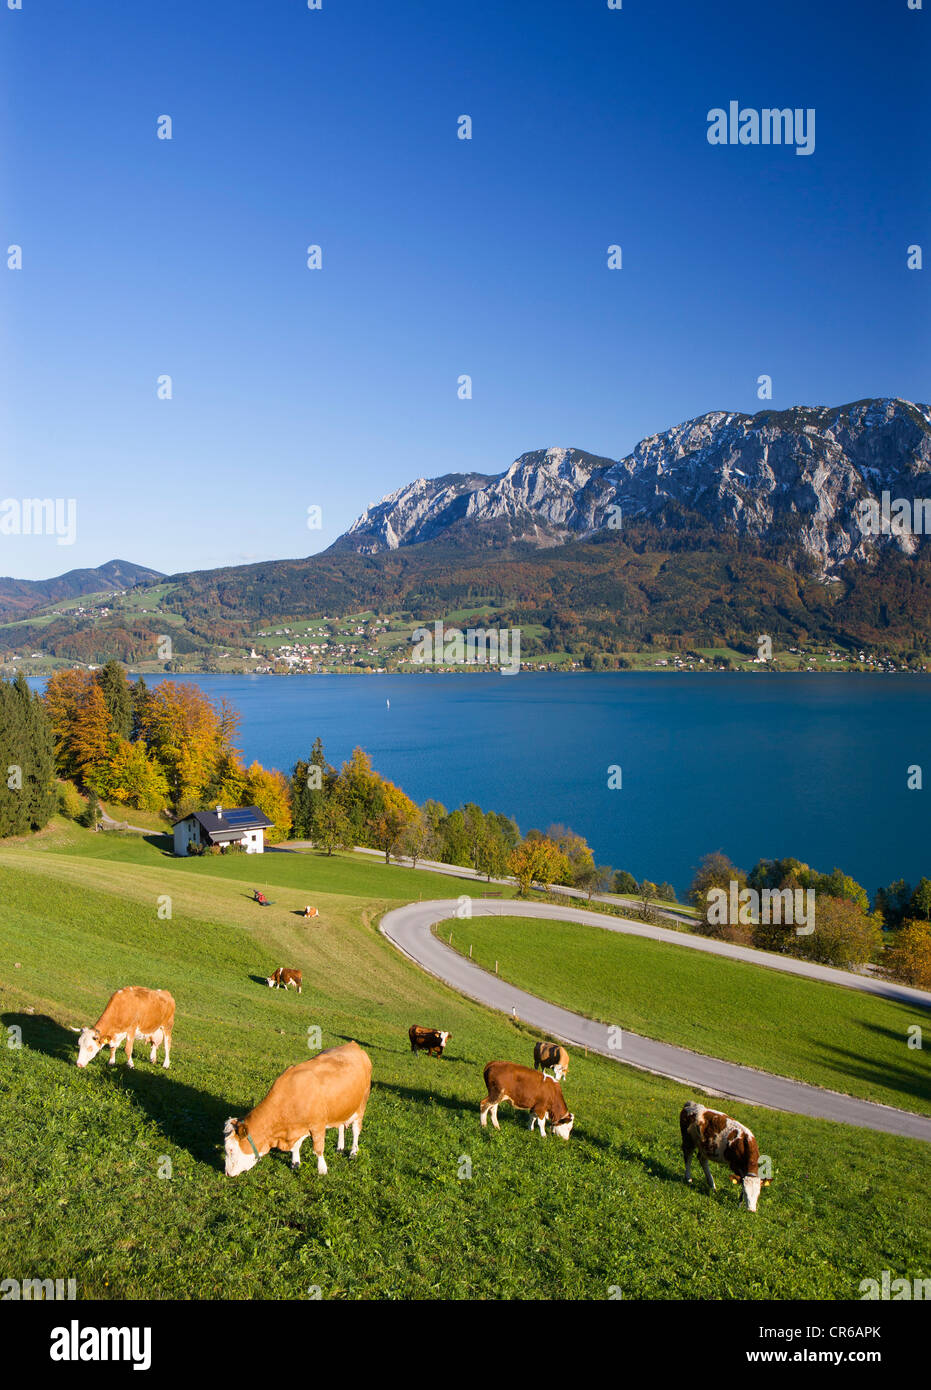 Austria, Attersee,  View of Hoellen Mountain during autumn with cows grazing in foreground Stock Photo